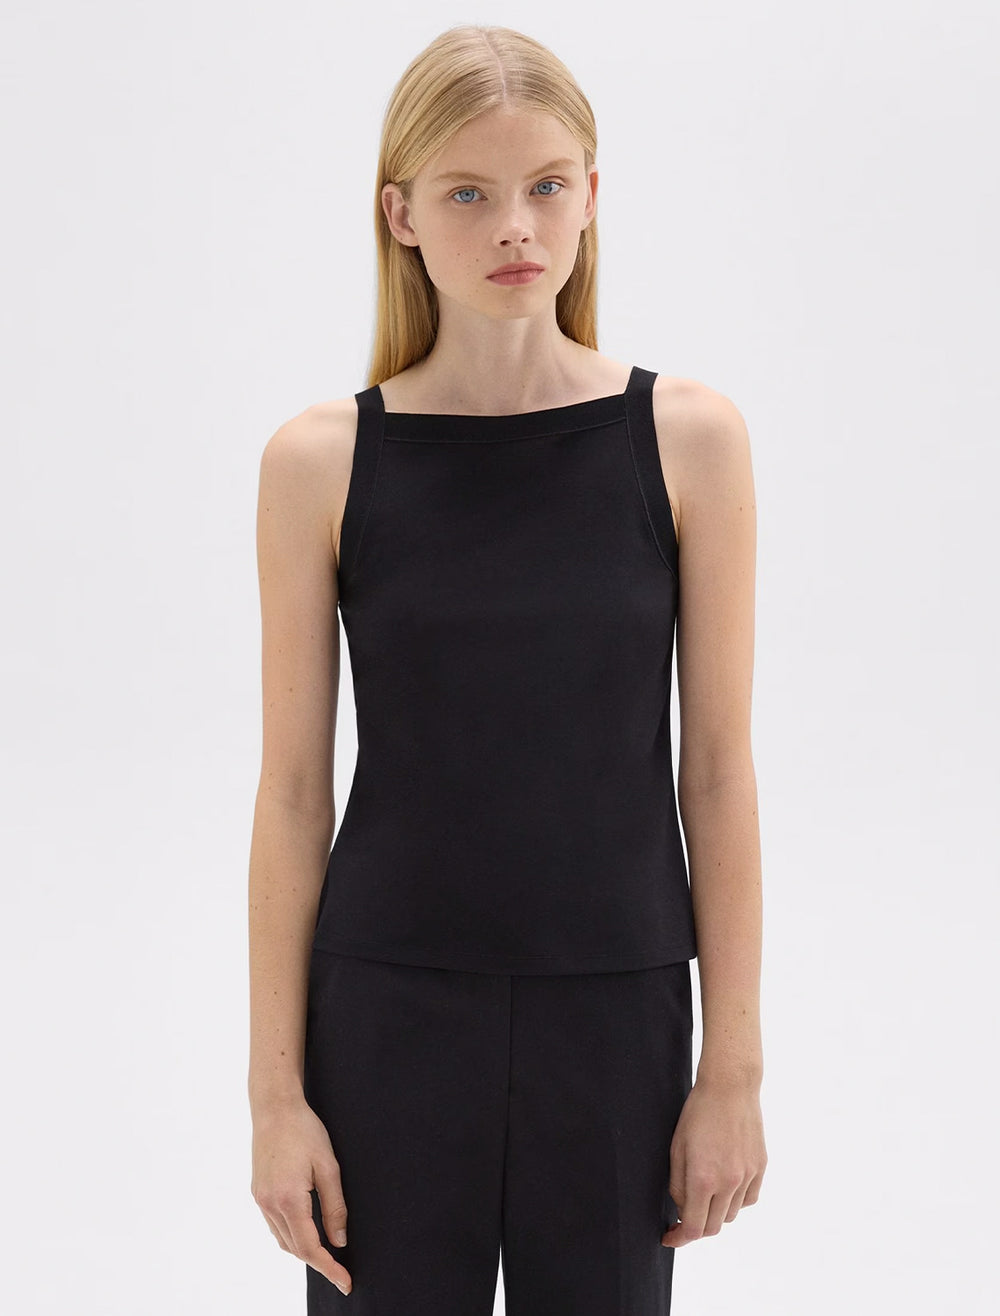 Model wearing Theory's square high neck tank in black.